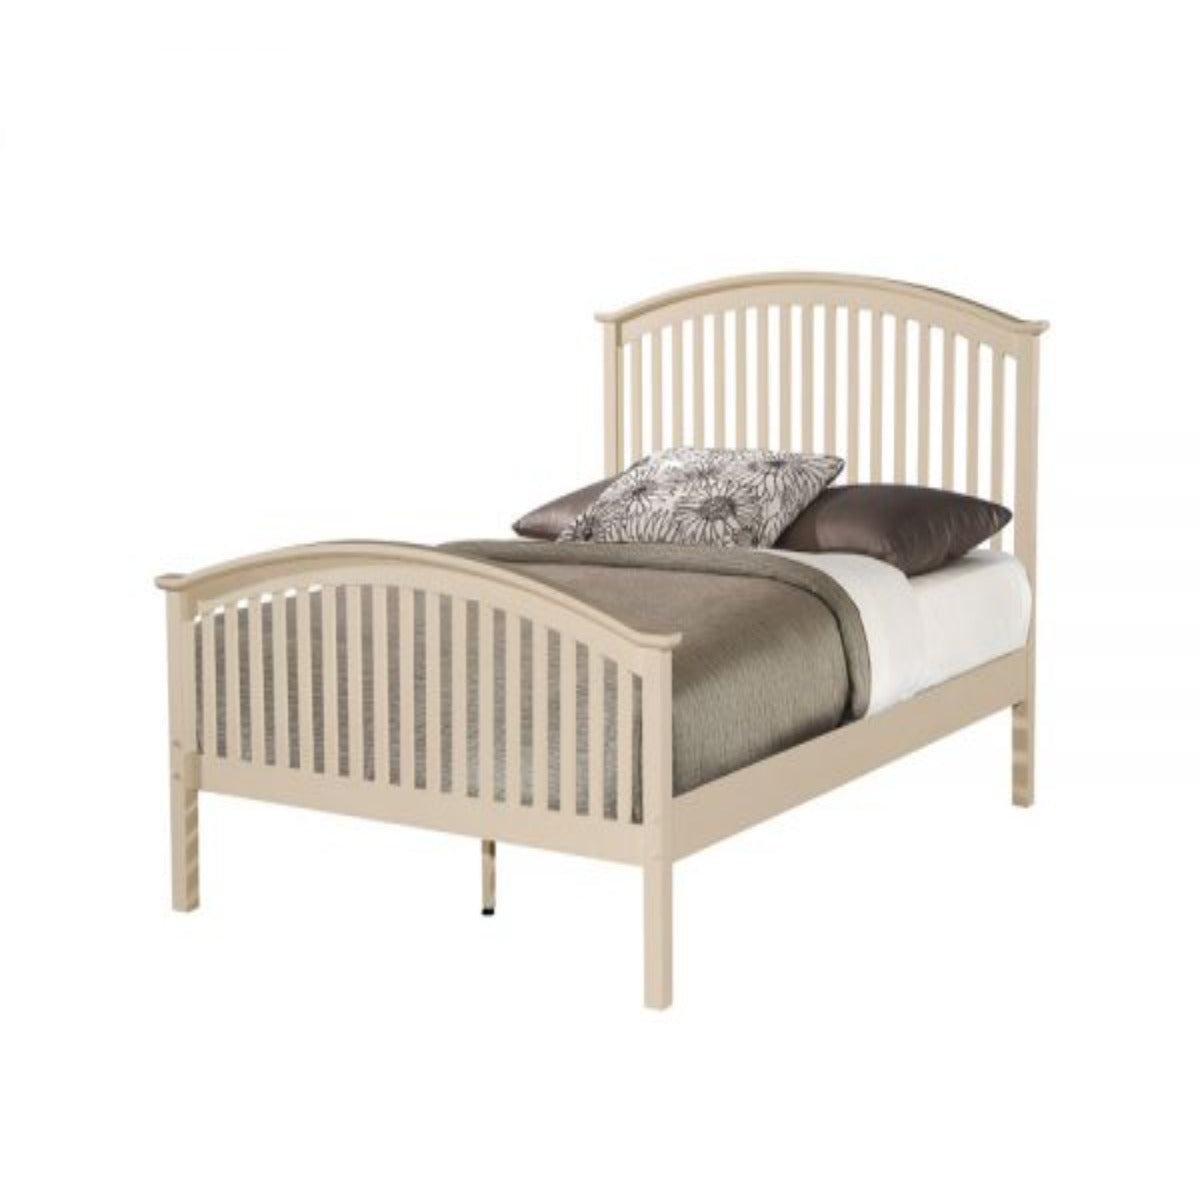 NEW SPECIAL Malta 3ft bed in cream